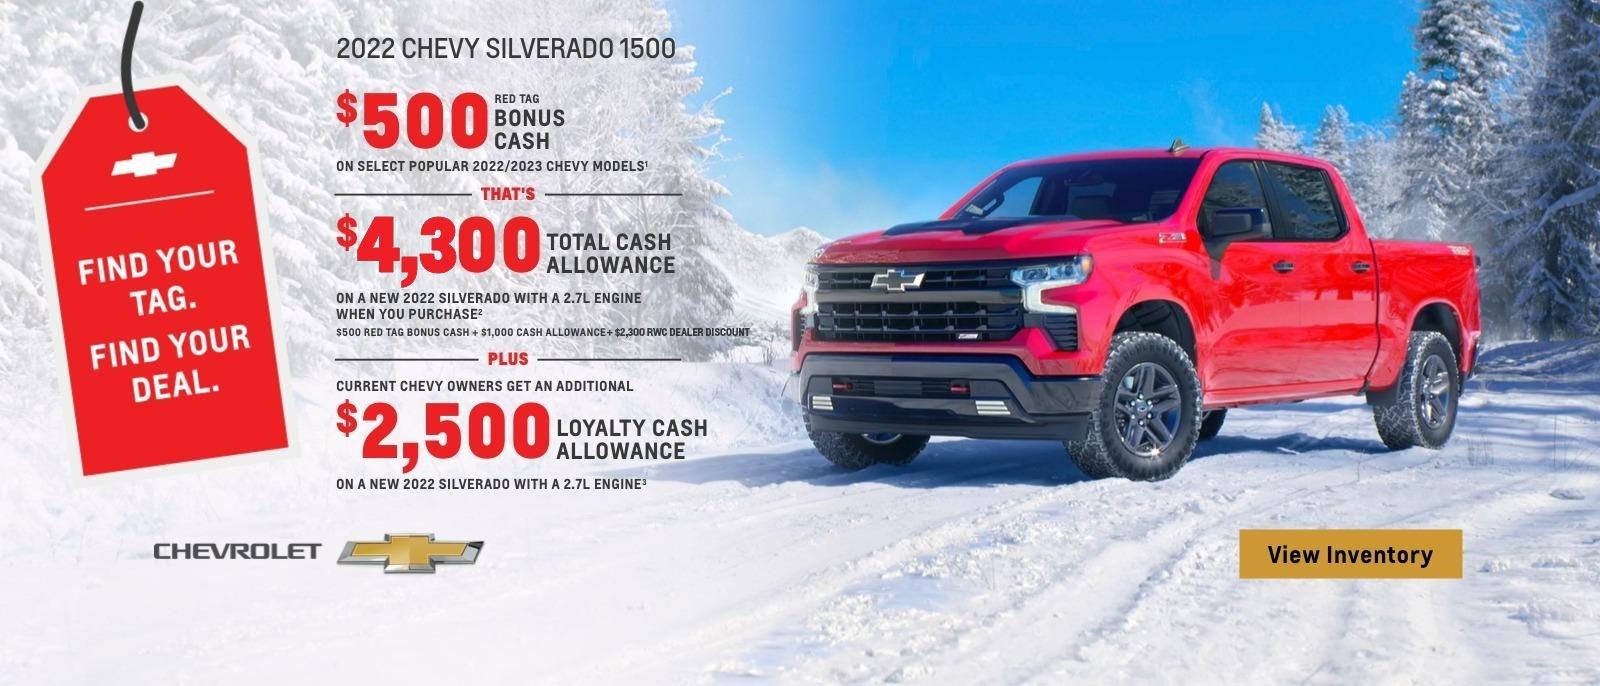 2022 Chevy Silverado 1500. $500 Red Tag Bonus Cash on select popular 2022/2023 Chevy models. That's $4,300 total cash allowance on a new 2022 Silverado with a 2.7L engine when you purchase. $500 Red Tag Bonus Cash plus $1,000 cash allowance. Plus, current Chevy owners get an additional $2,500 loyalty cash allowance on a new Silverado with 2.7L engine.